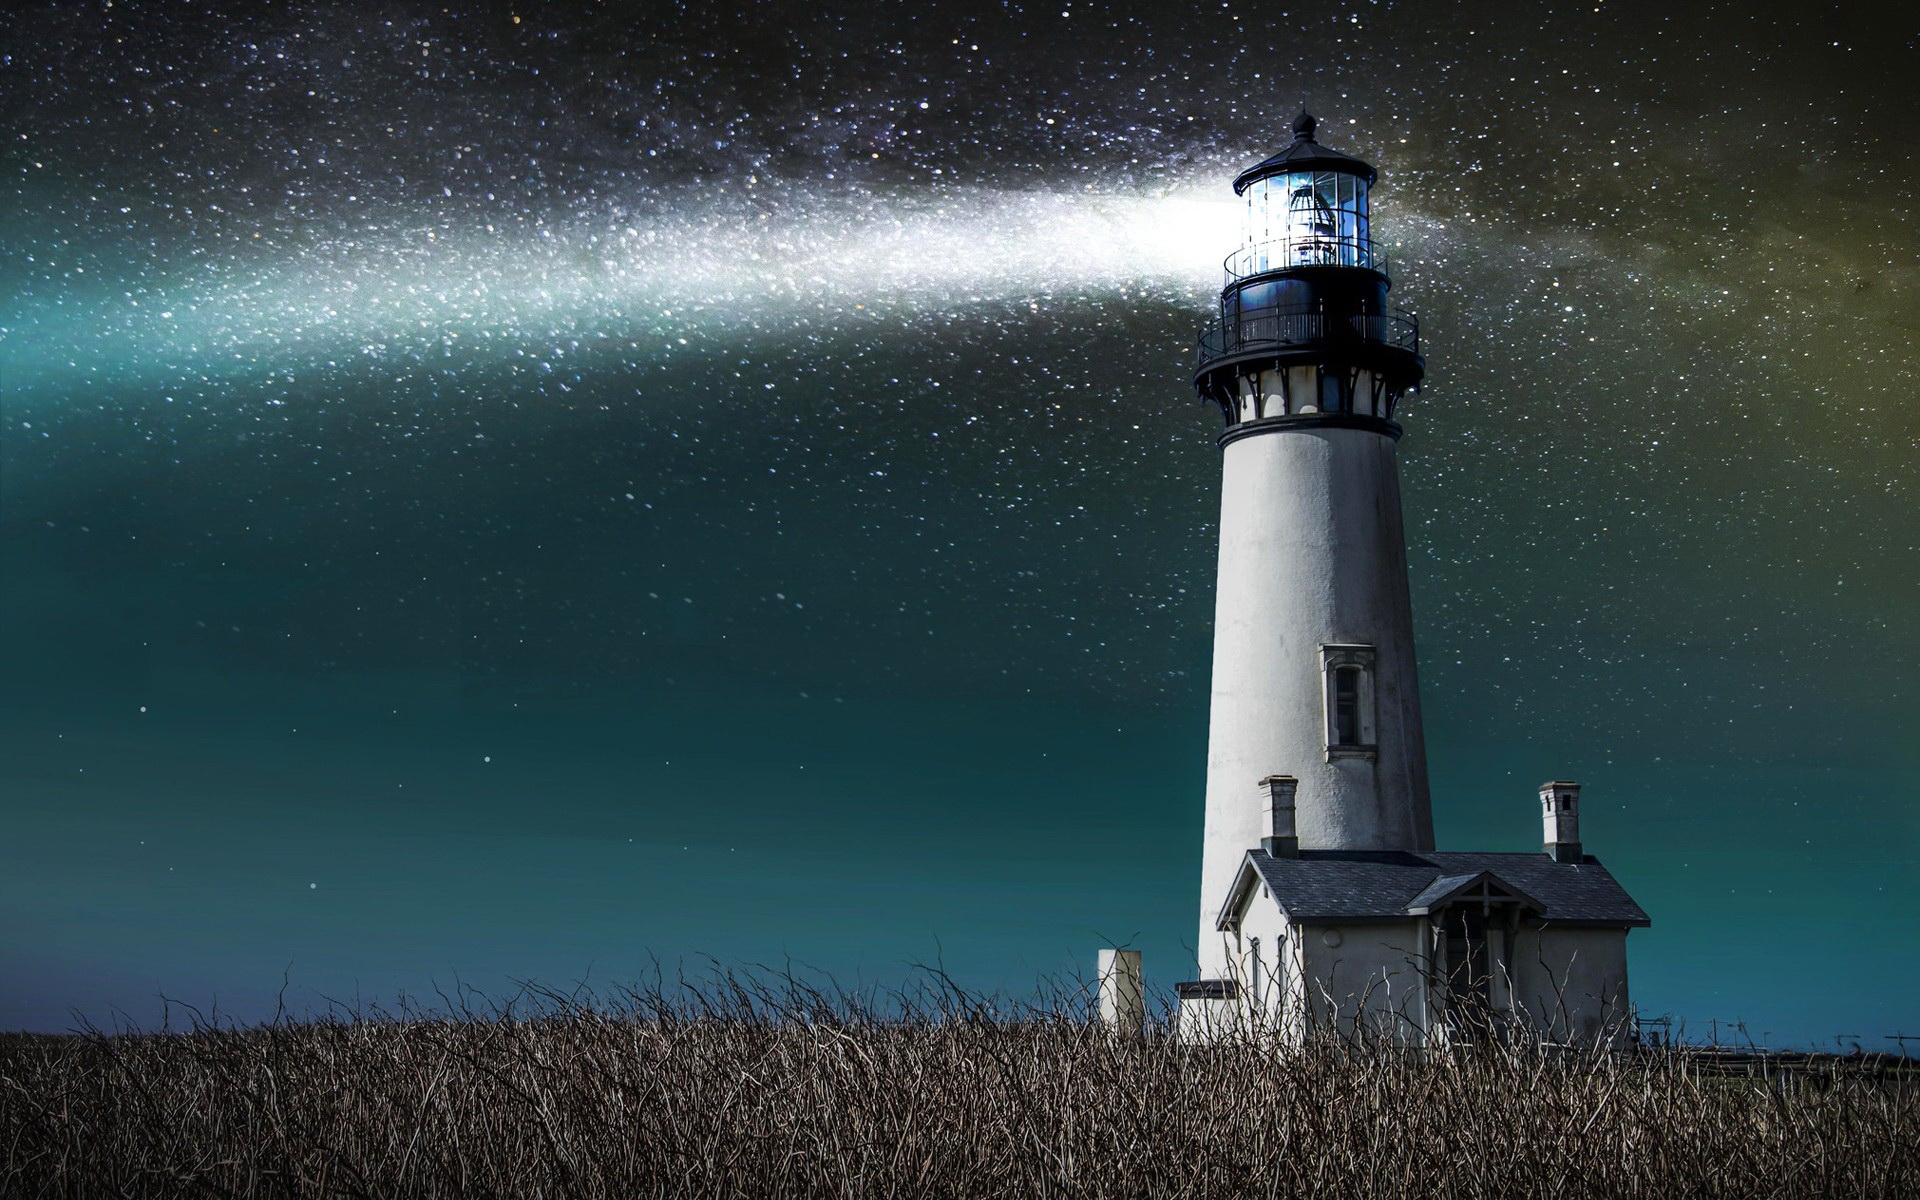 HD WALLPAPER FOR PHONE  THE LIGHTHOUSE